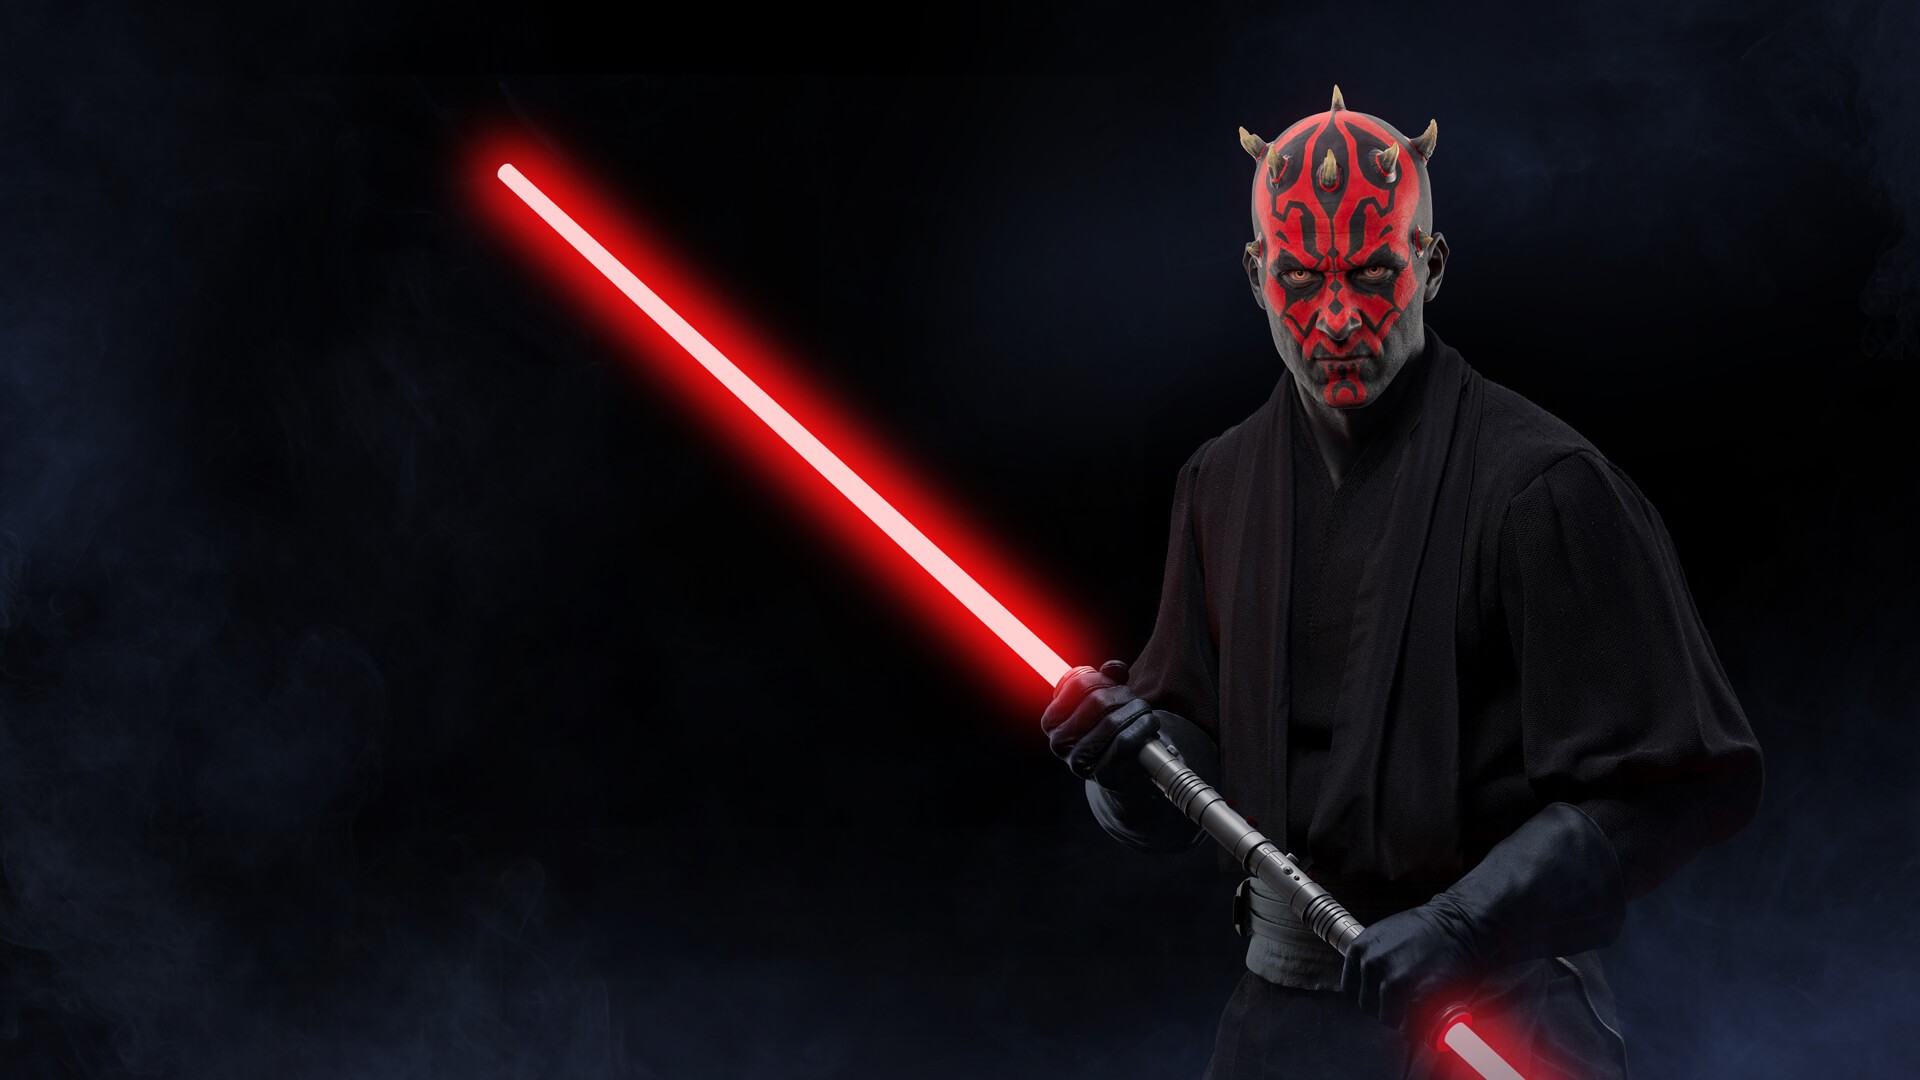 General 1920x1080 Star Wars Battlefront II Darth Maul Star Wars: Battlefront Star Wars Villains Sith horns simple background video games lightsaber PC gaming